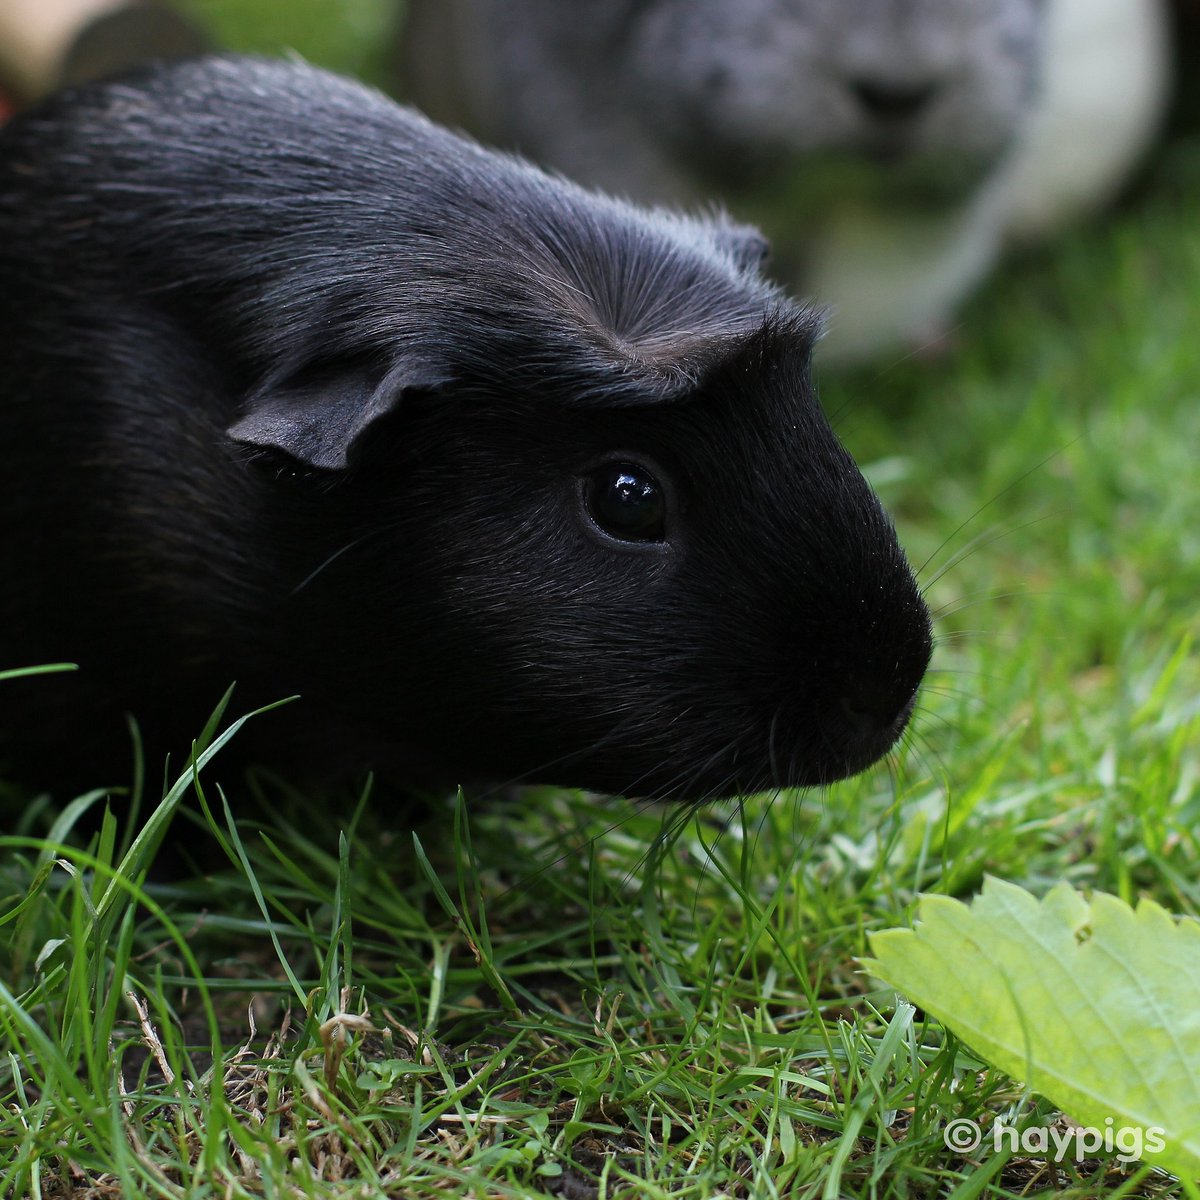 🐹 'I'll stop wearing black when they invent a darker colour.' - Wednesday Addams #tuesdaythoughts #greatquotes #blackisthenewblack #JetGuineaPig #satinguineapig #cavylove